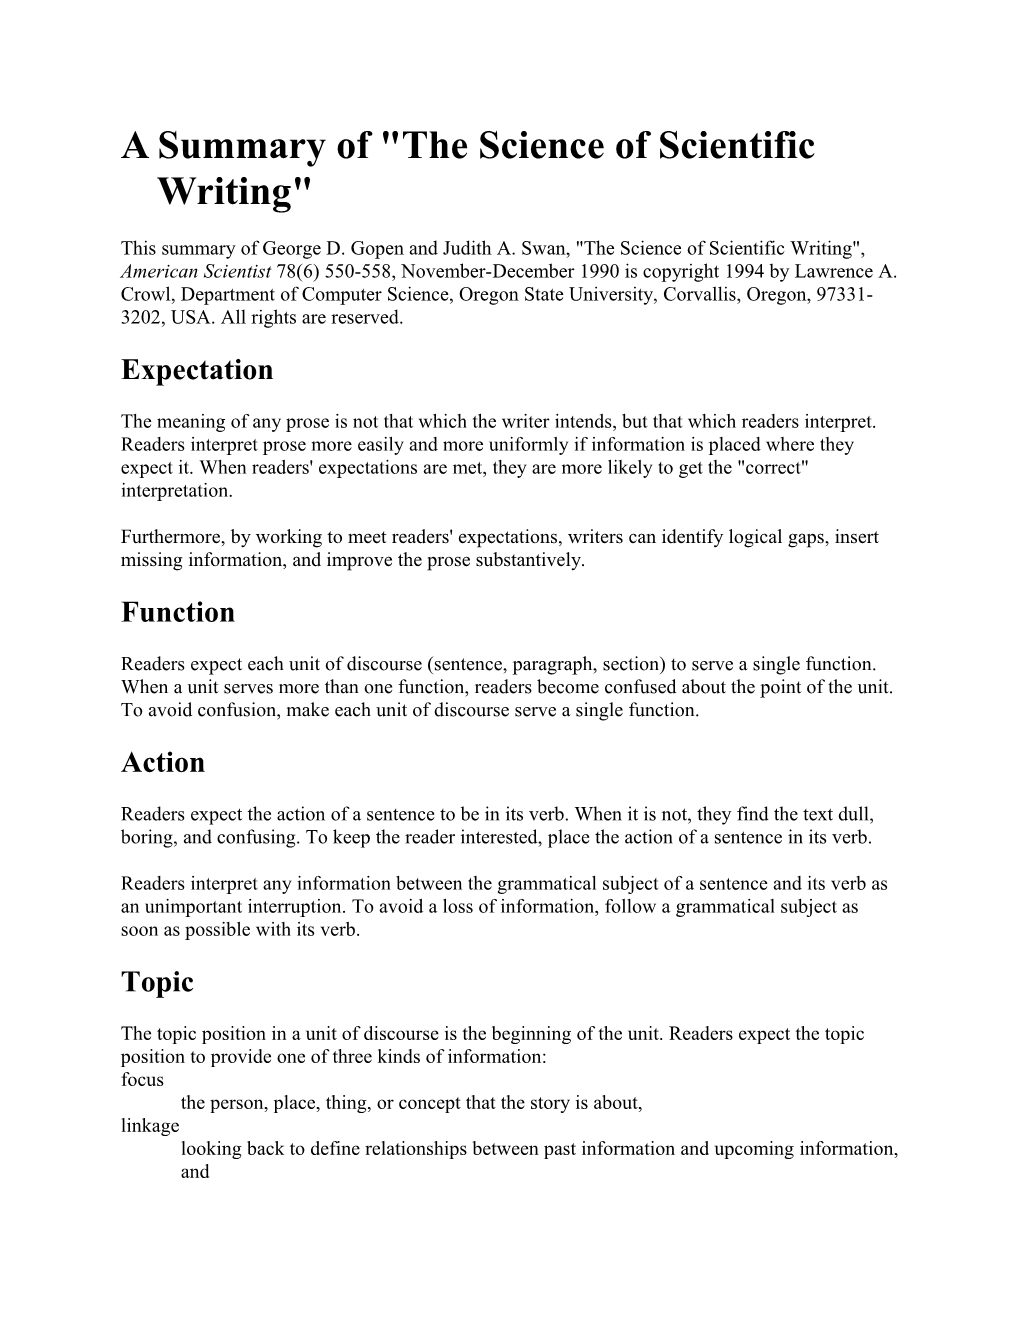 A Summary of the Science of Scientific Writing